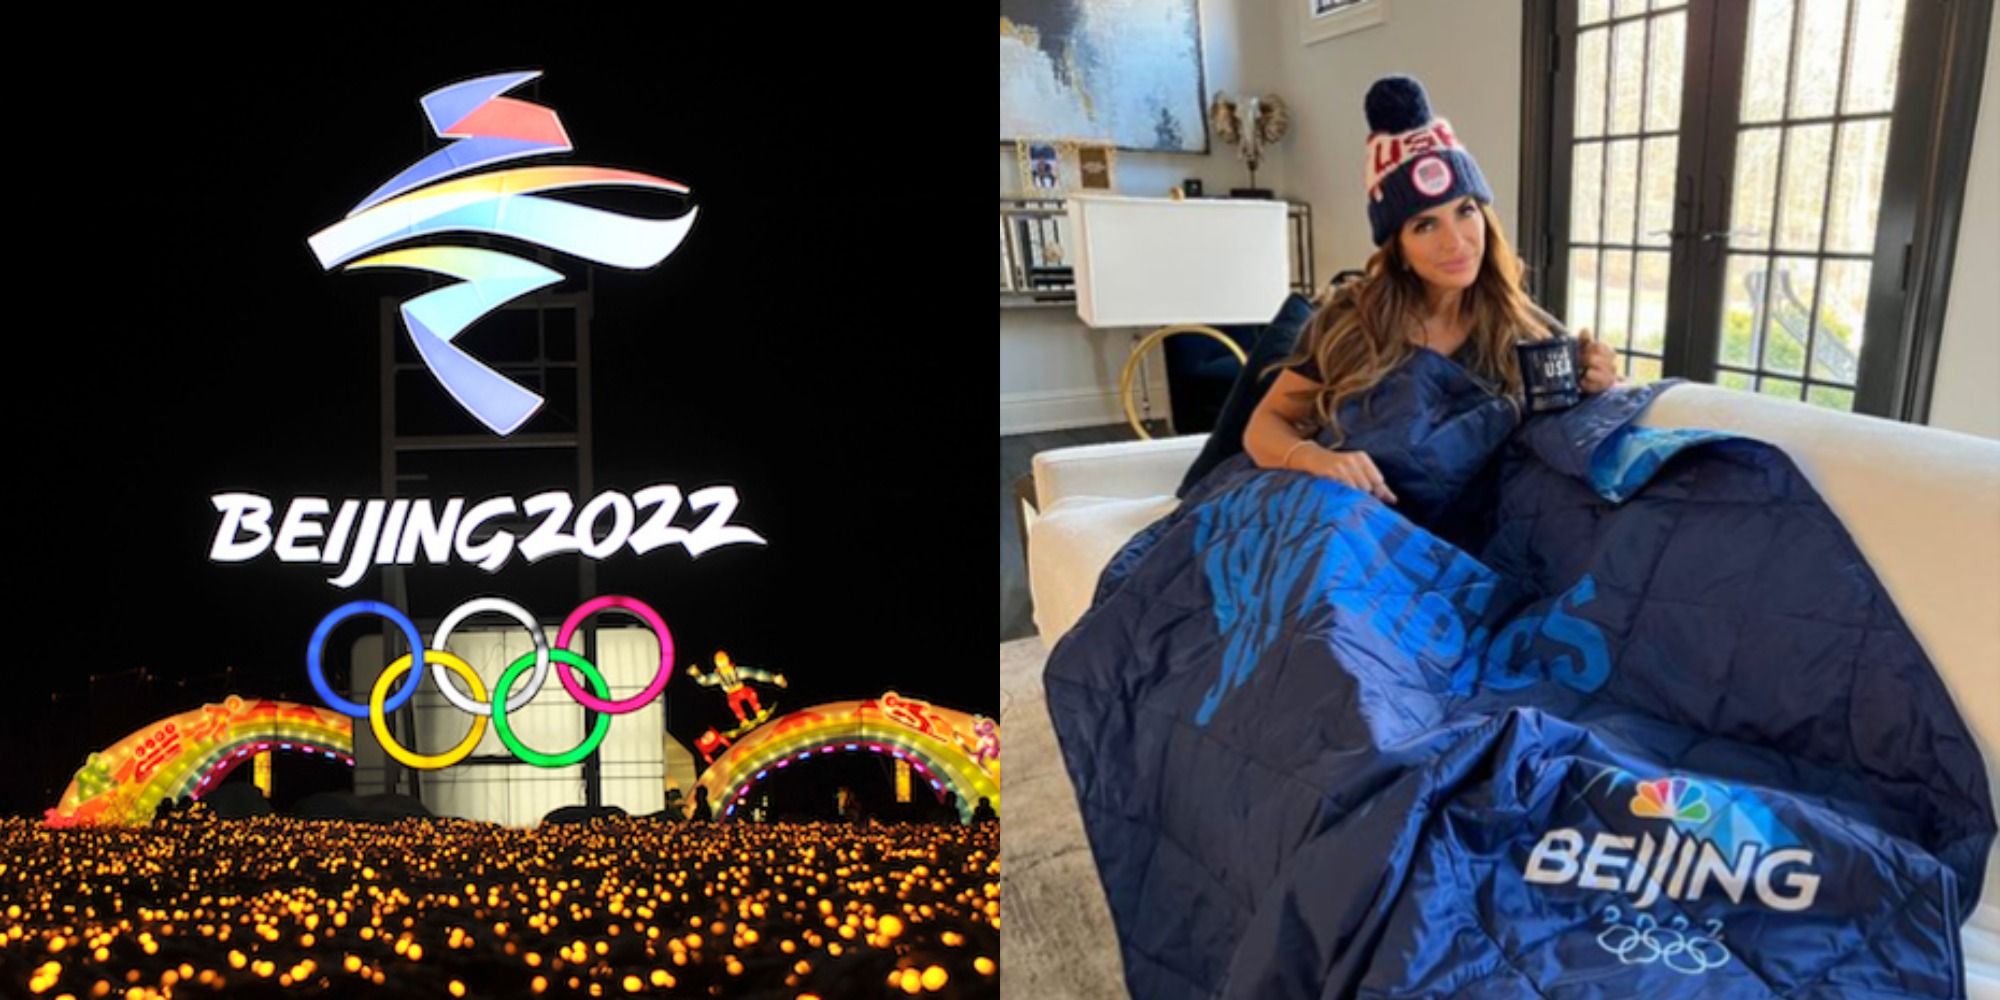 Split image showing the logo for Beijing 2022 and an IG photo of Teresa Guidice